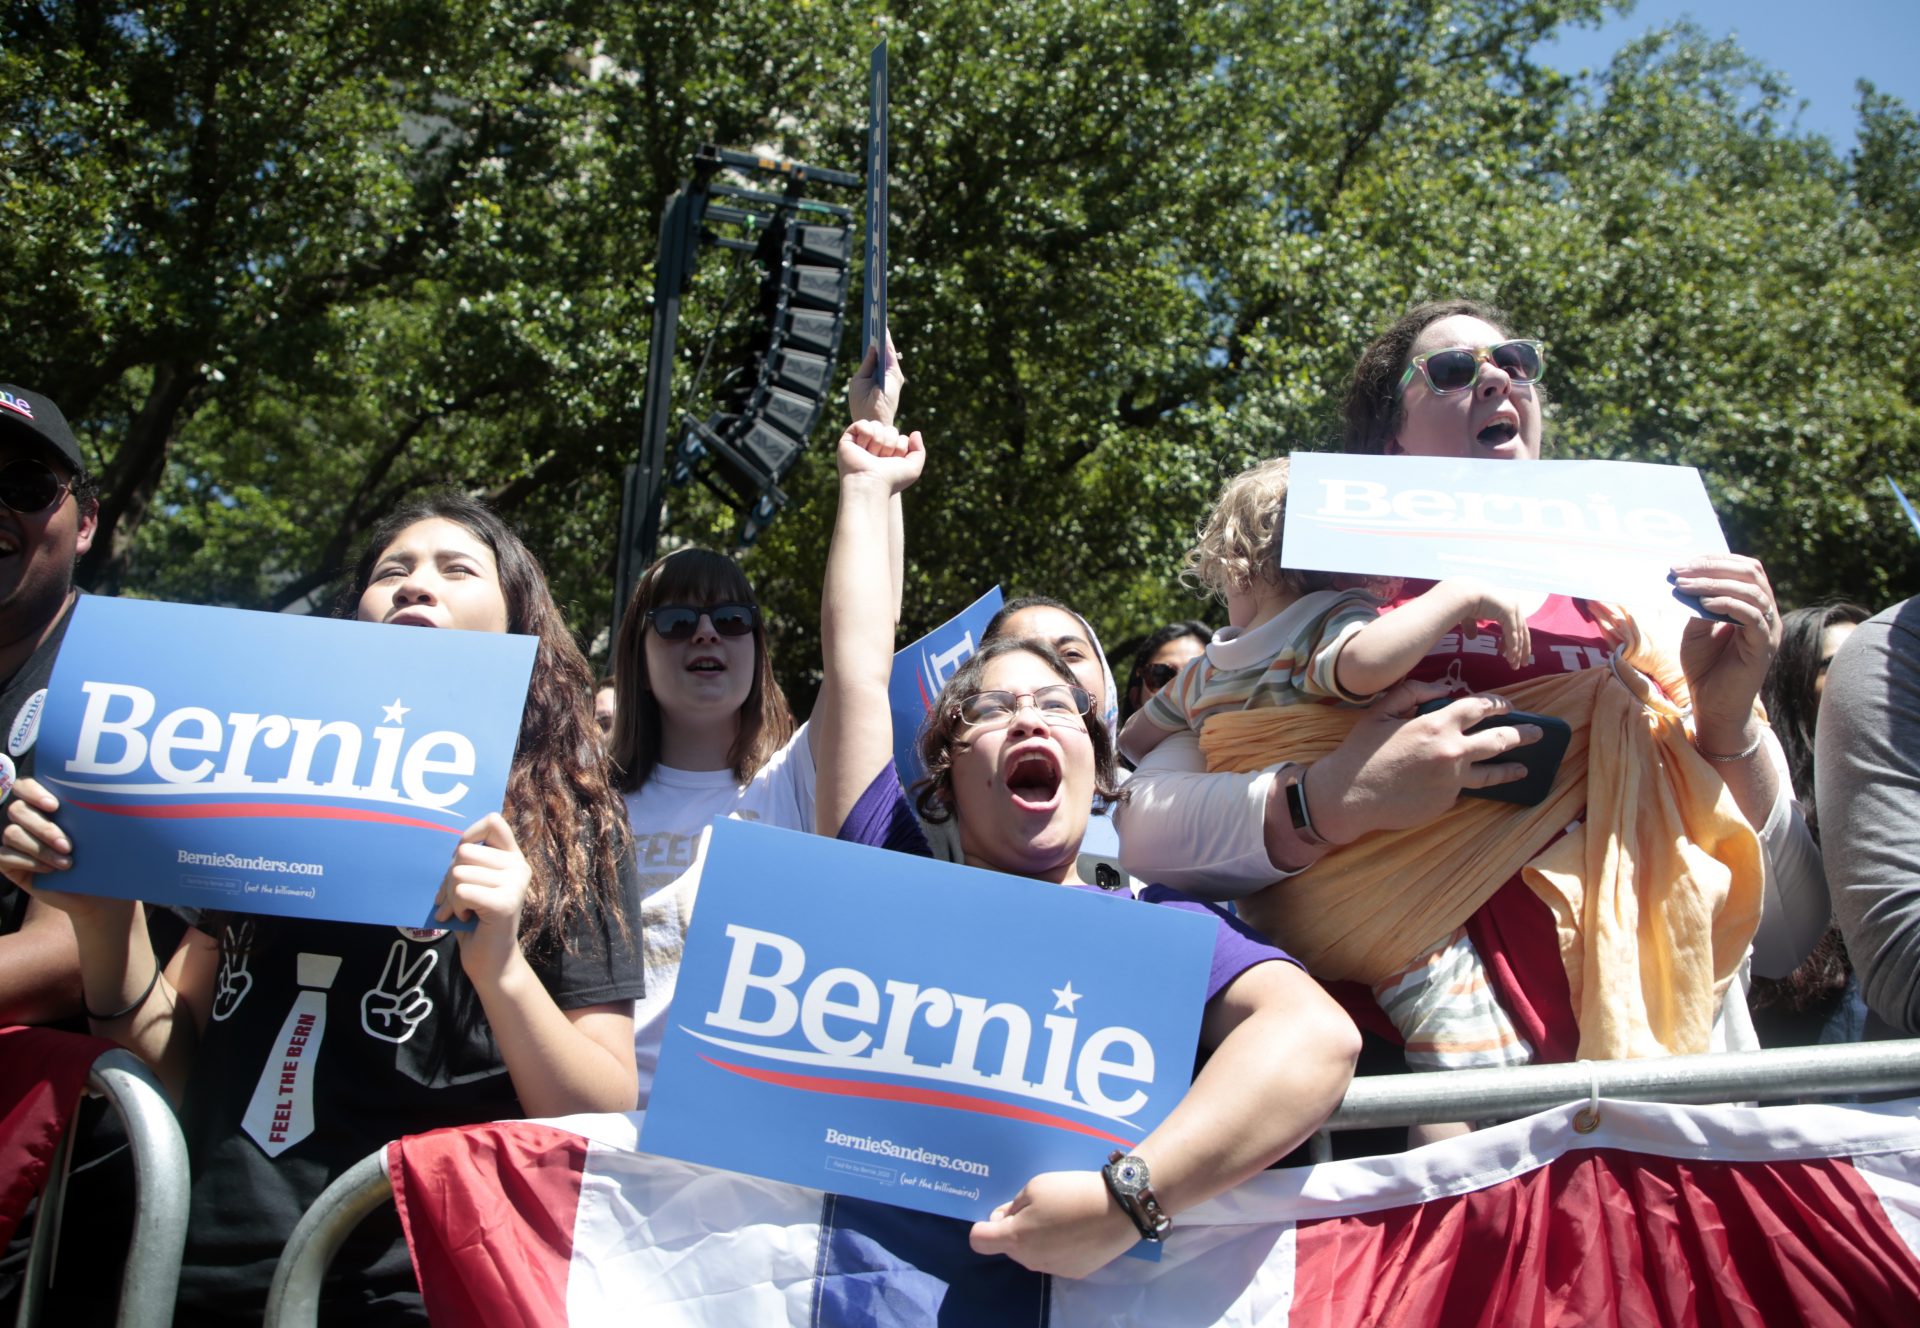 Supporters cheer for Democratic Presidential candidate Bernie Sanders as he speaks at rally in Fort Worth, Texas, Thursday, April 25, 2019.